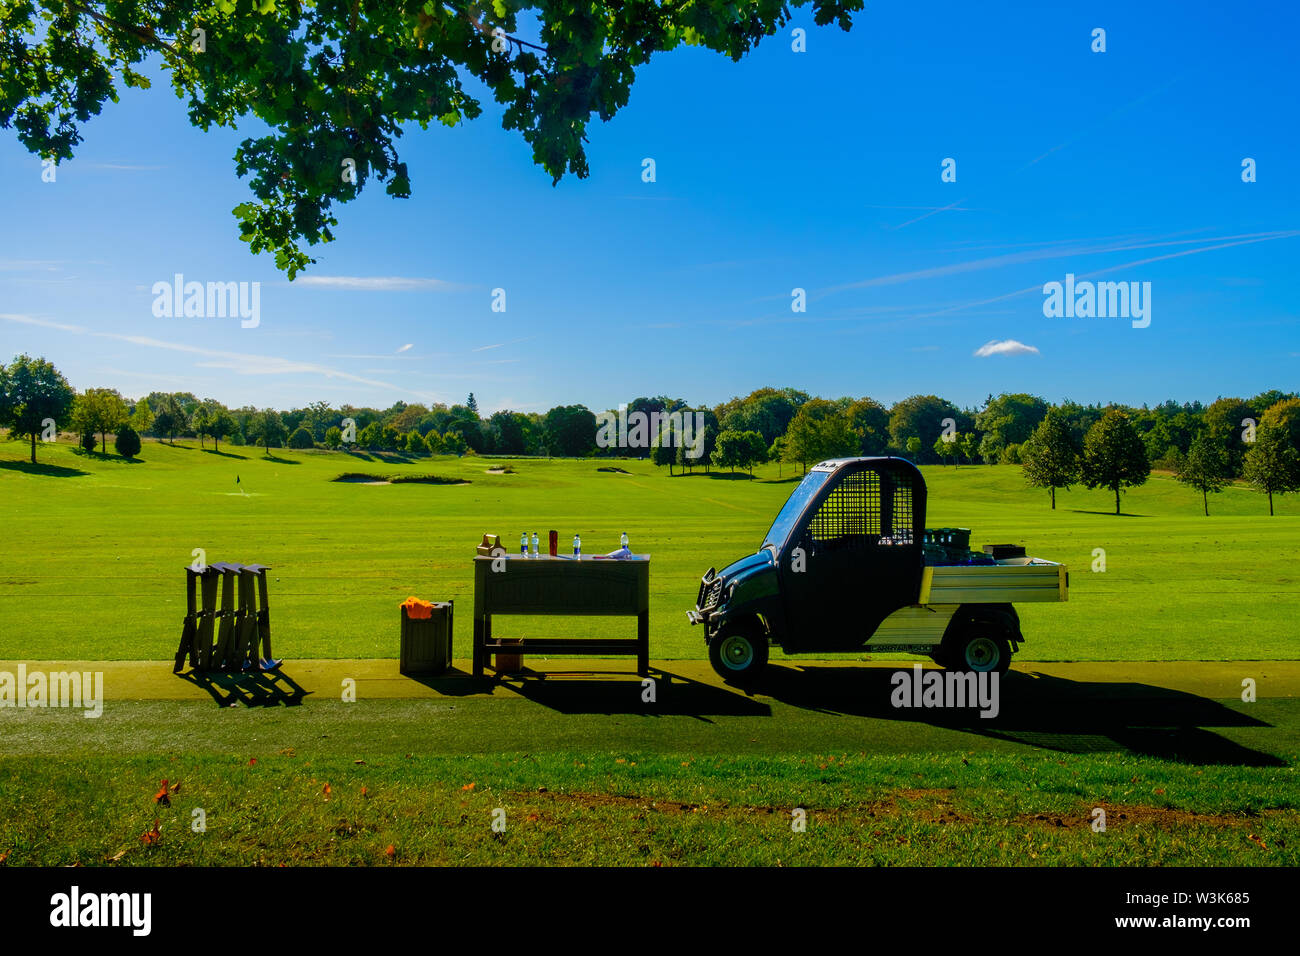 Golf utility vehicle parked by the green of a golf course in Hertfordshire, England Stock Photo